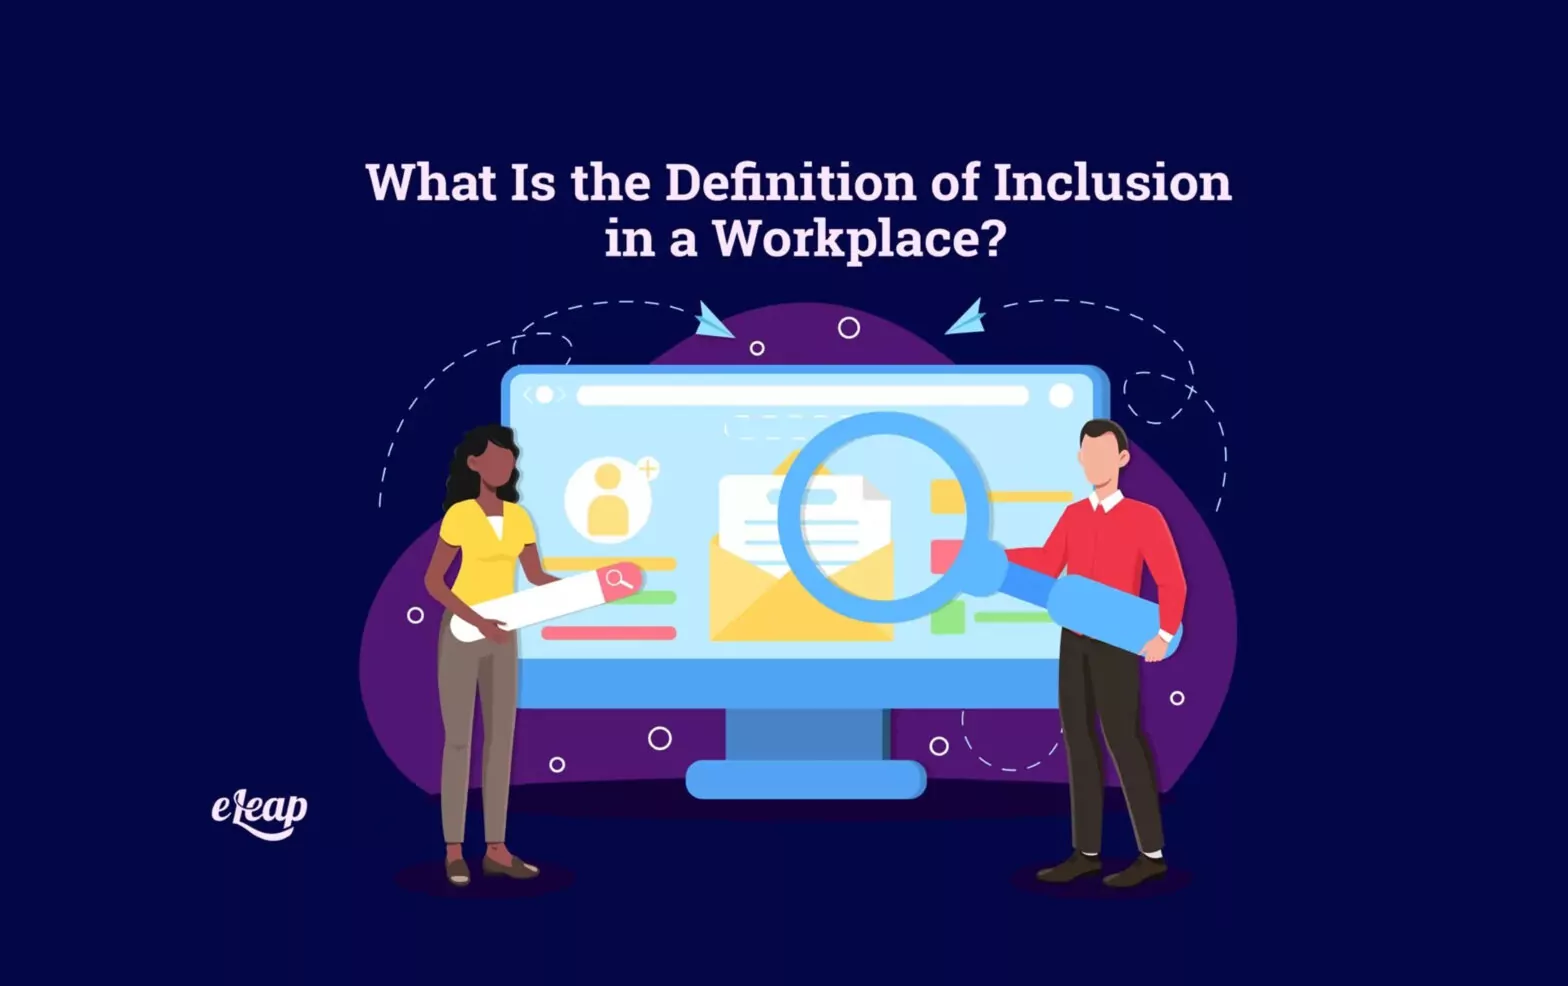 What Is the Definition of Inclusion in a Workplace?